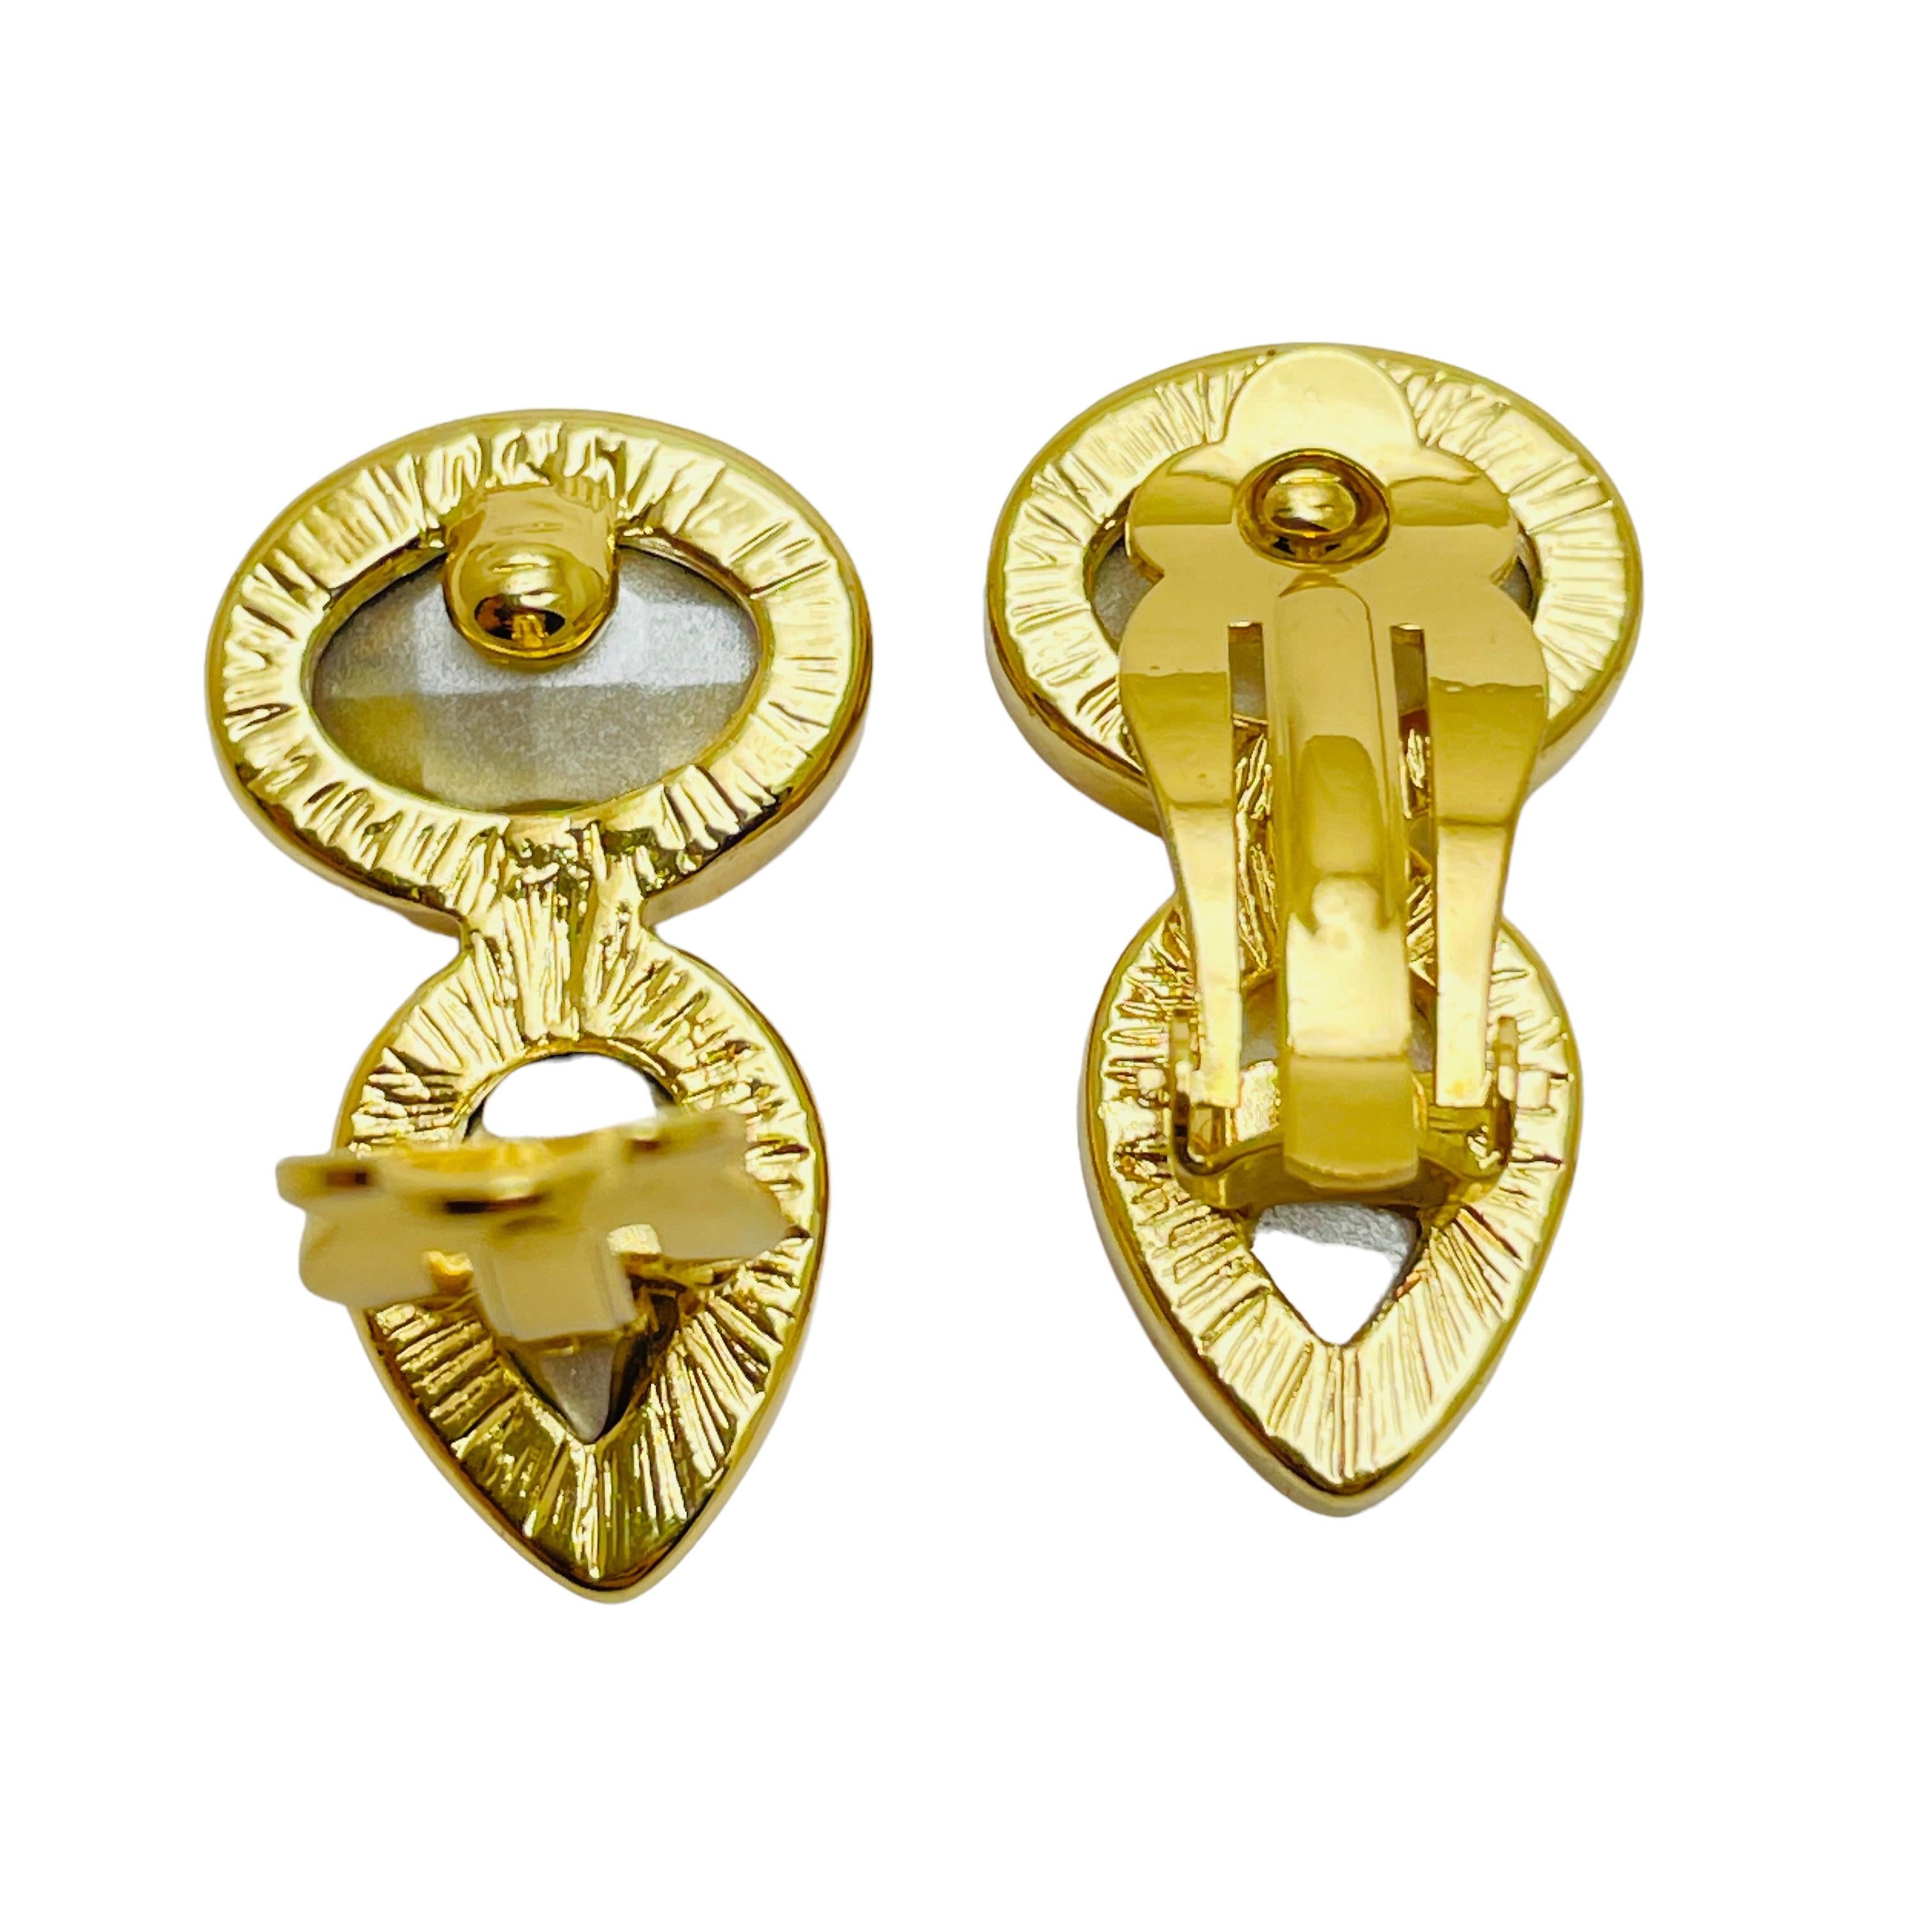 Vintage gold red glass designer runway clip on earrings In Good Condition For Sale In Palos Hills, IL